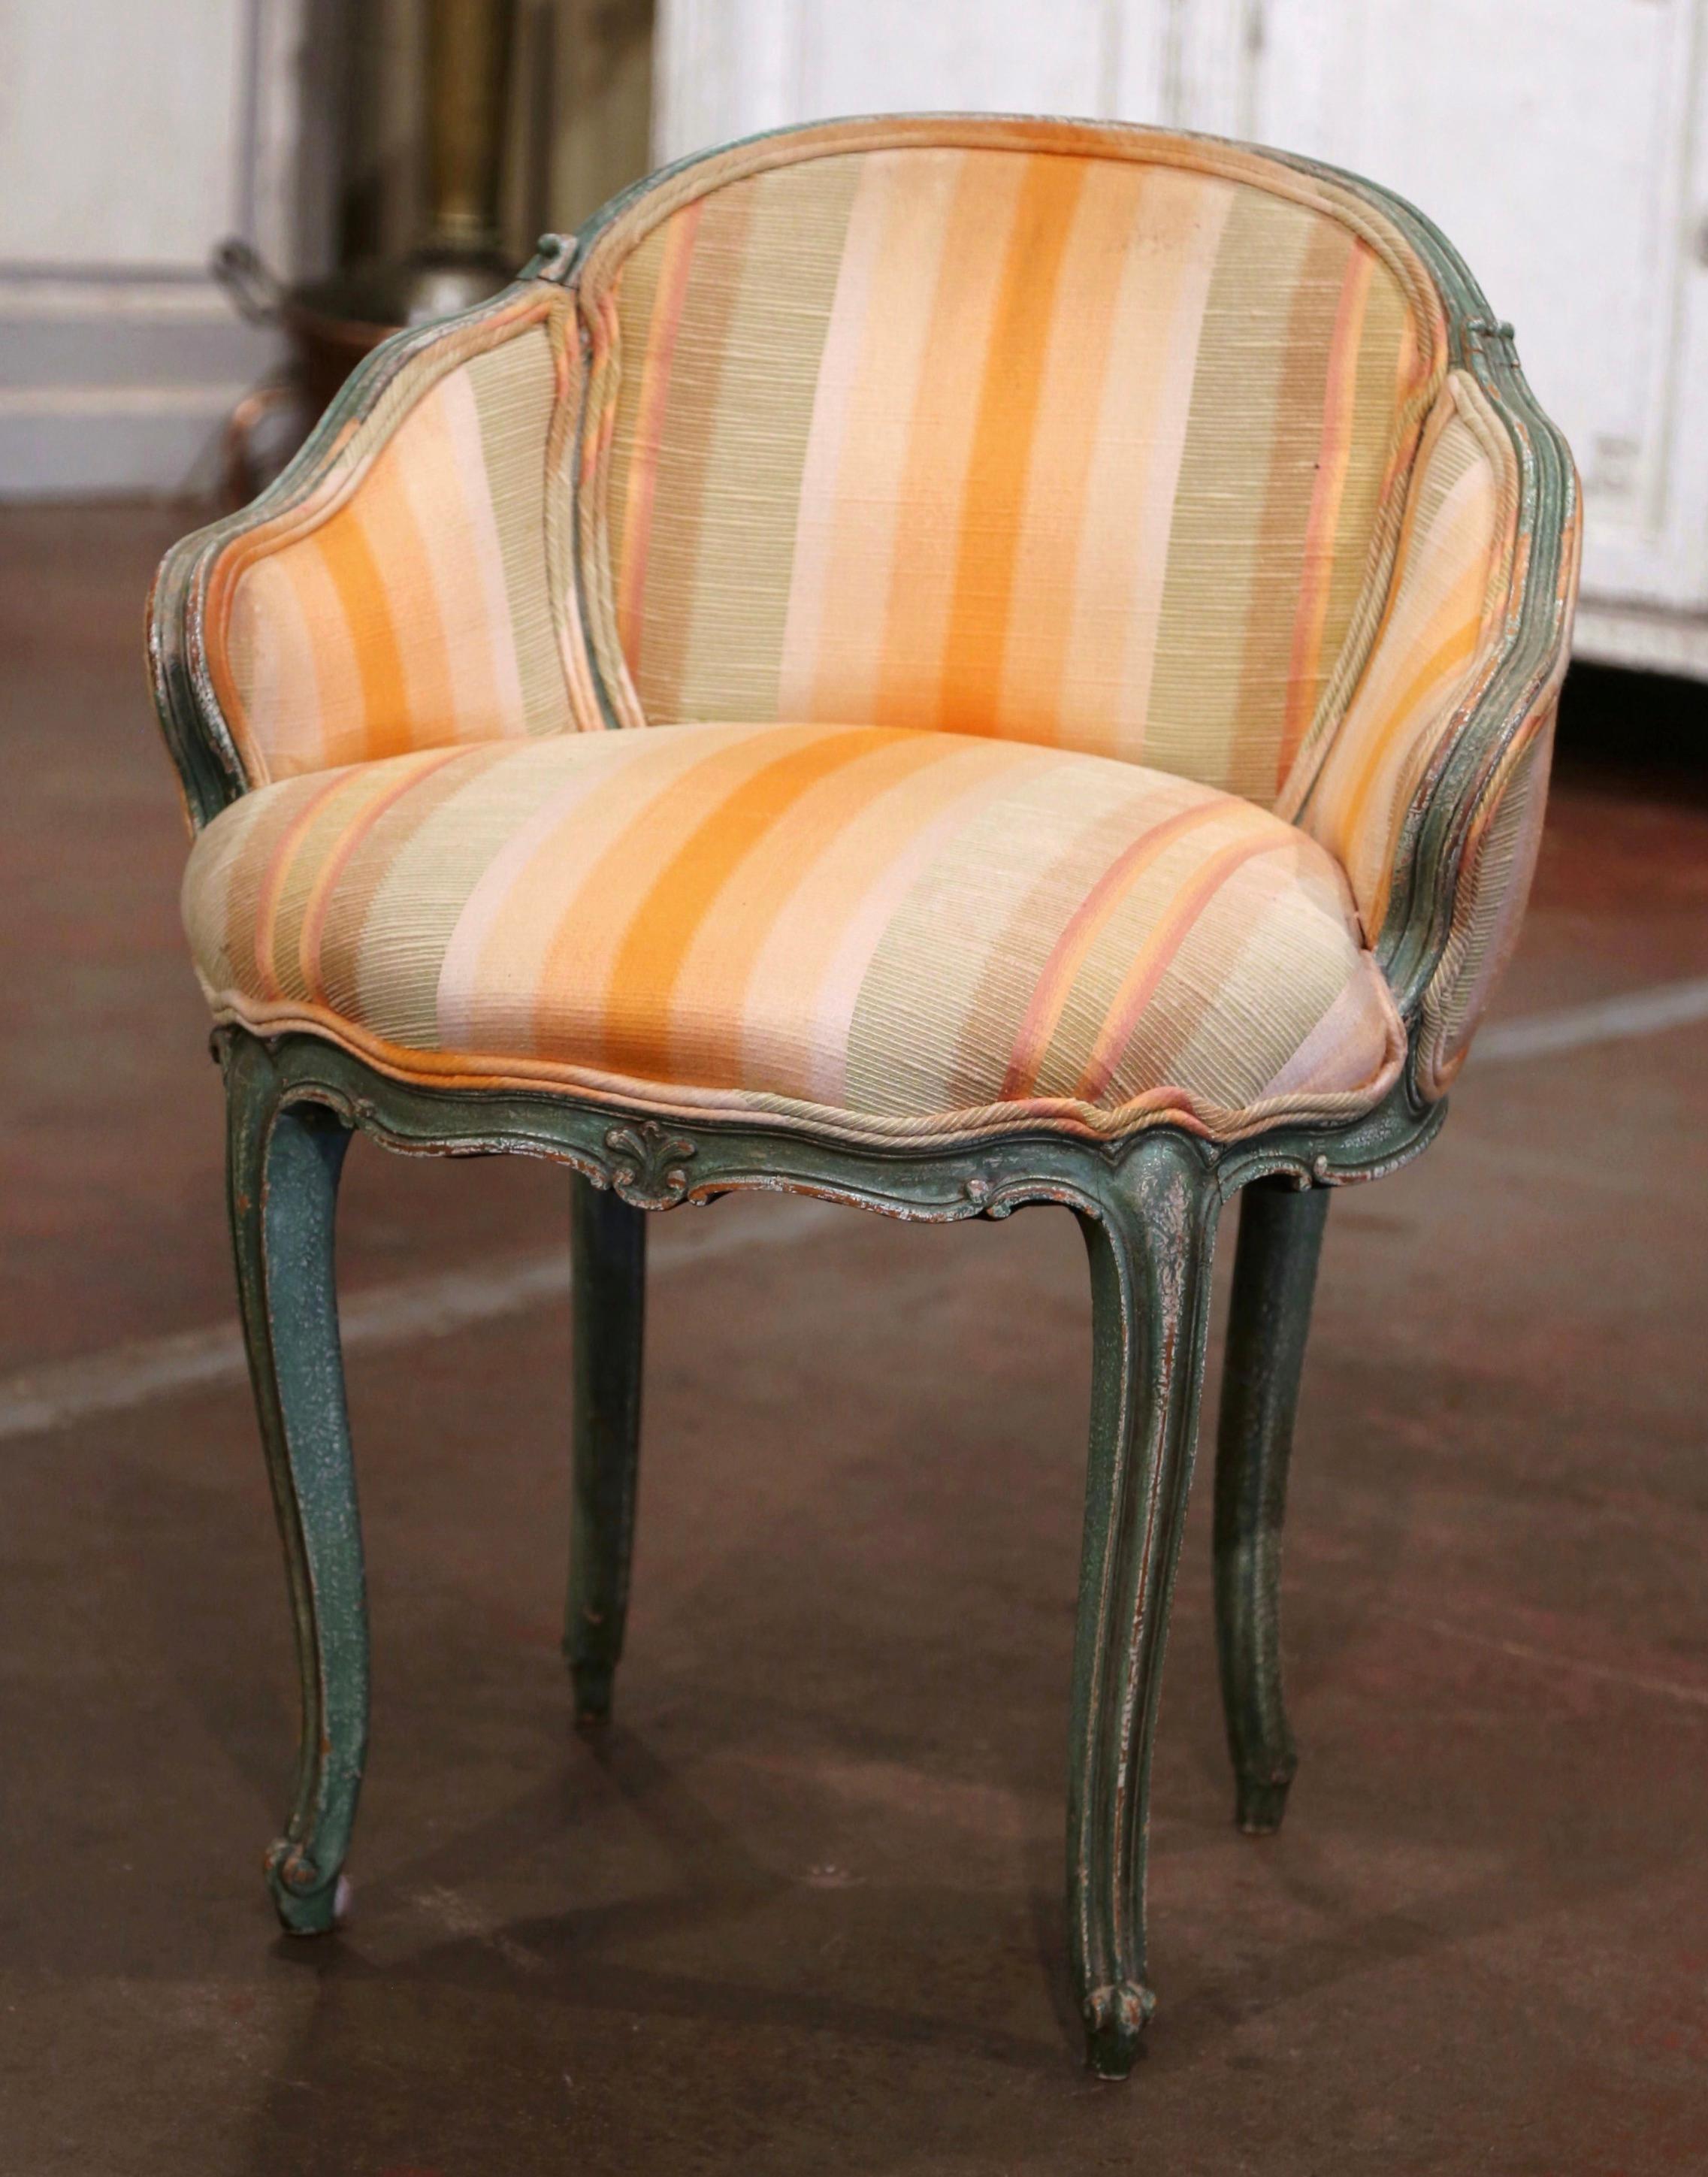 Decorate a master bathroom or bedroom with this elegant antique armchair; crafted in France circa 1920, the chair stands on cabriole legs over a curved apron. The chair is embellished with curved armrests which lead seamlessly up around the back of